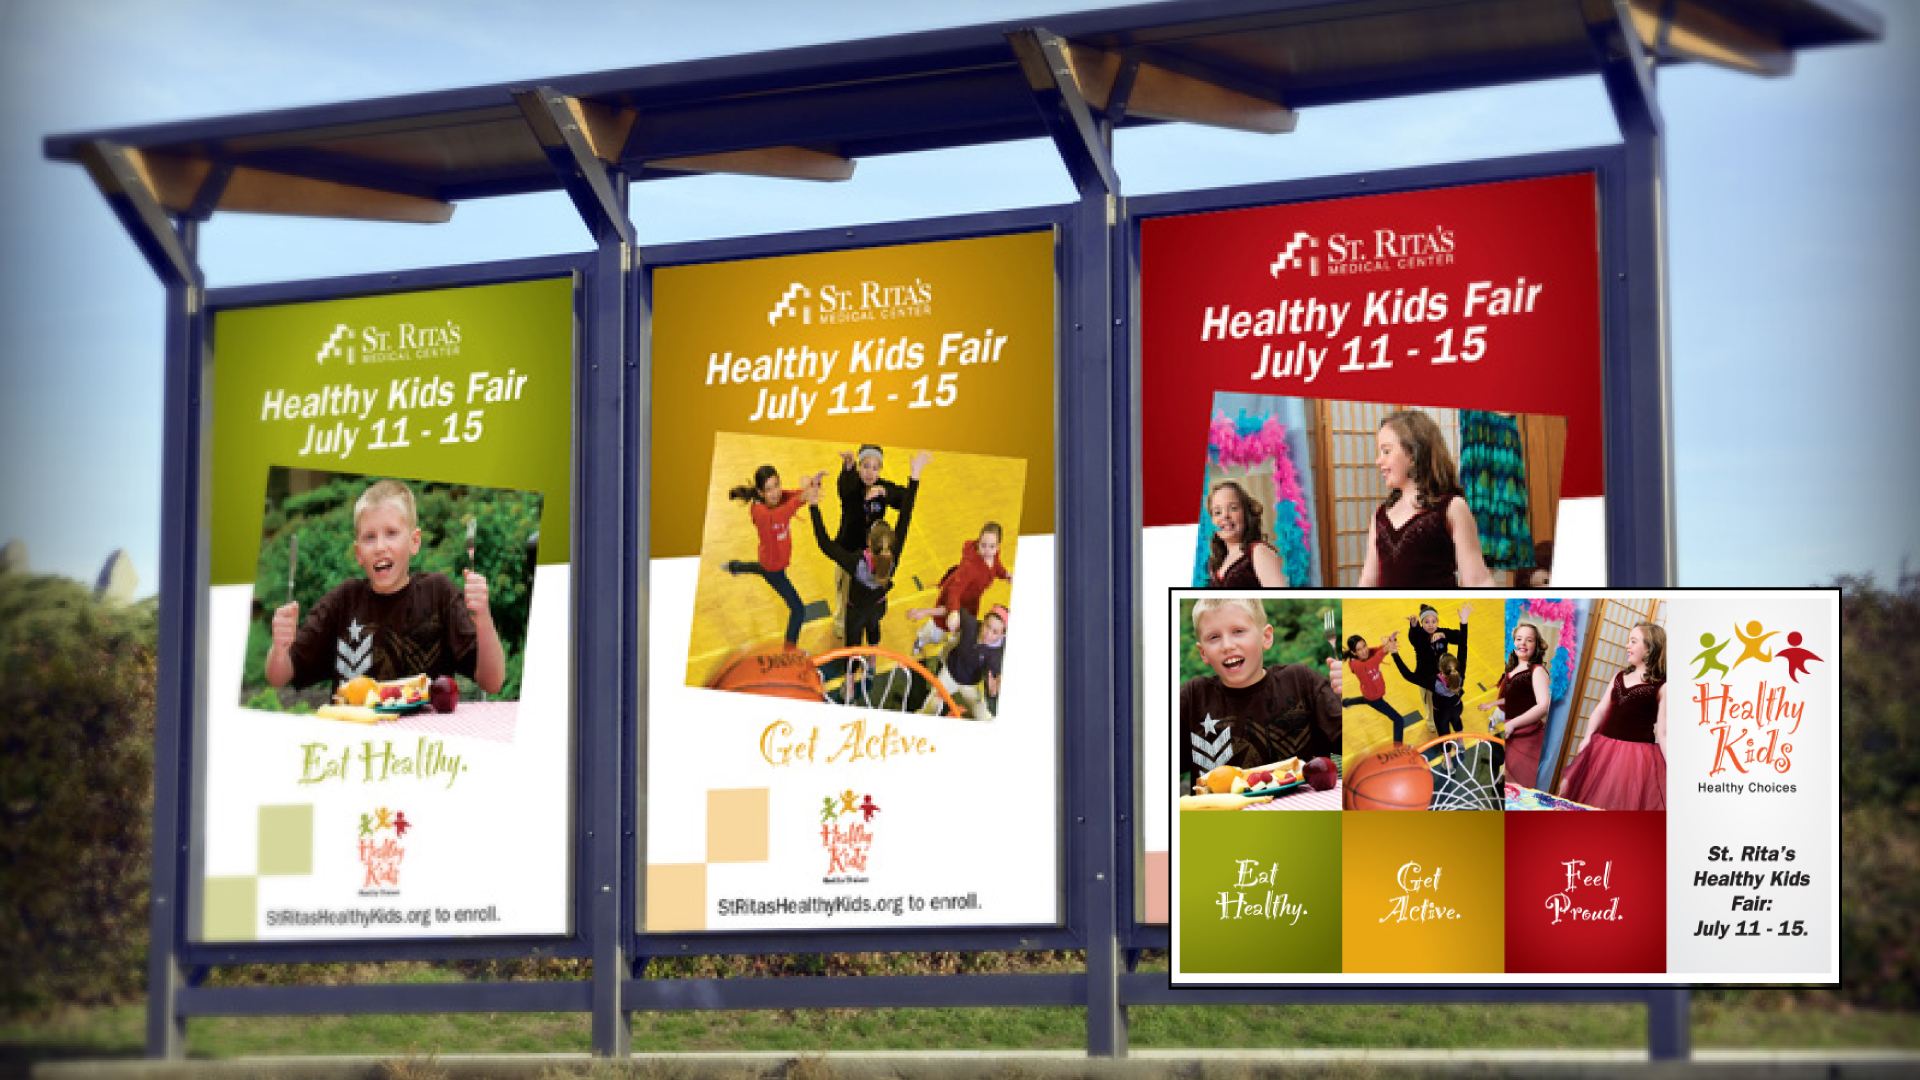 Healthy Kids Event Marketing Campaign